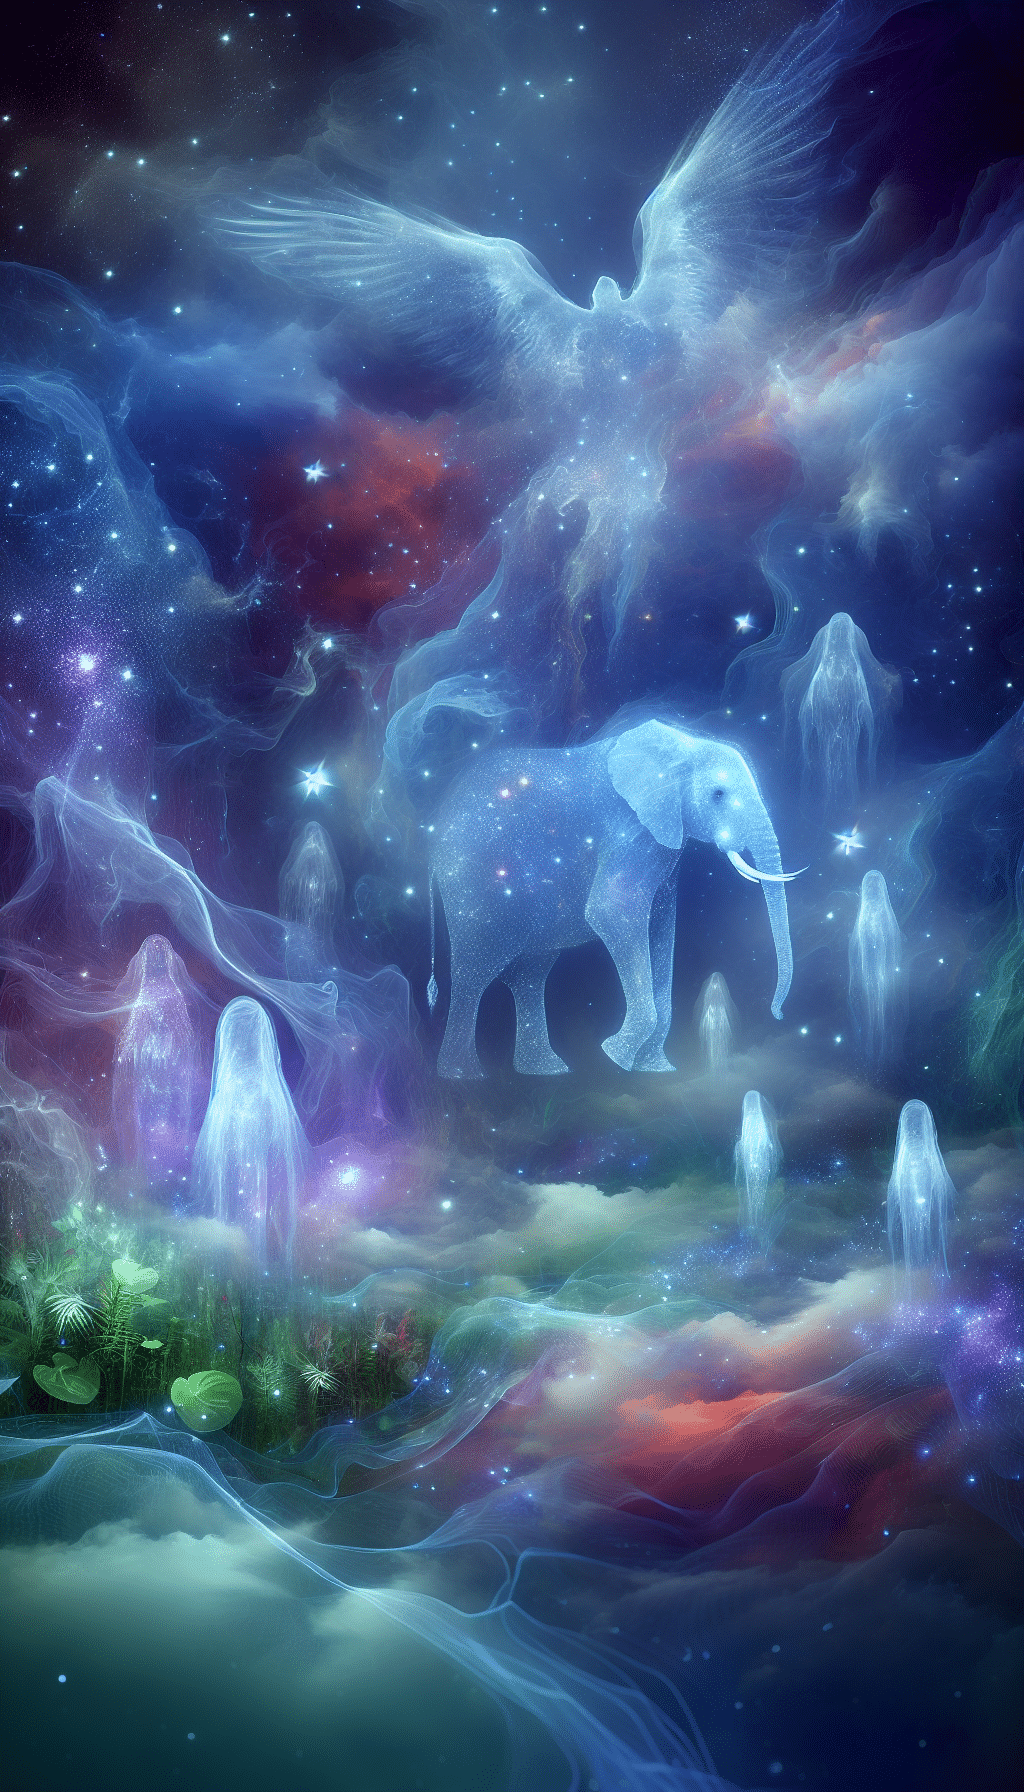 dead elephant dream meaning